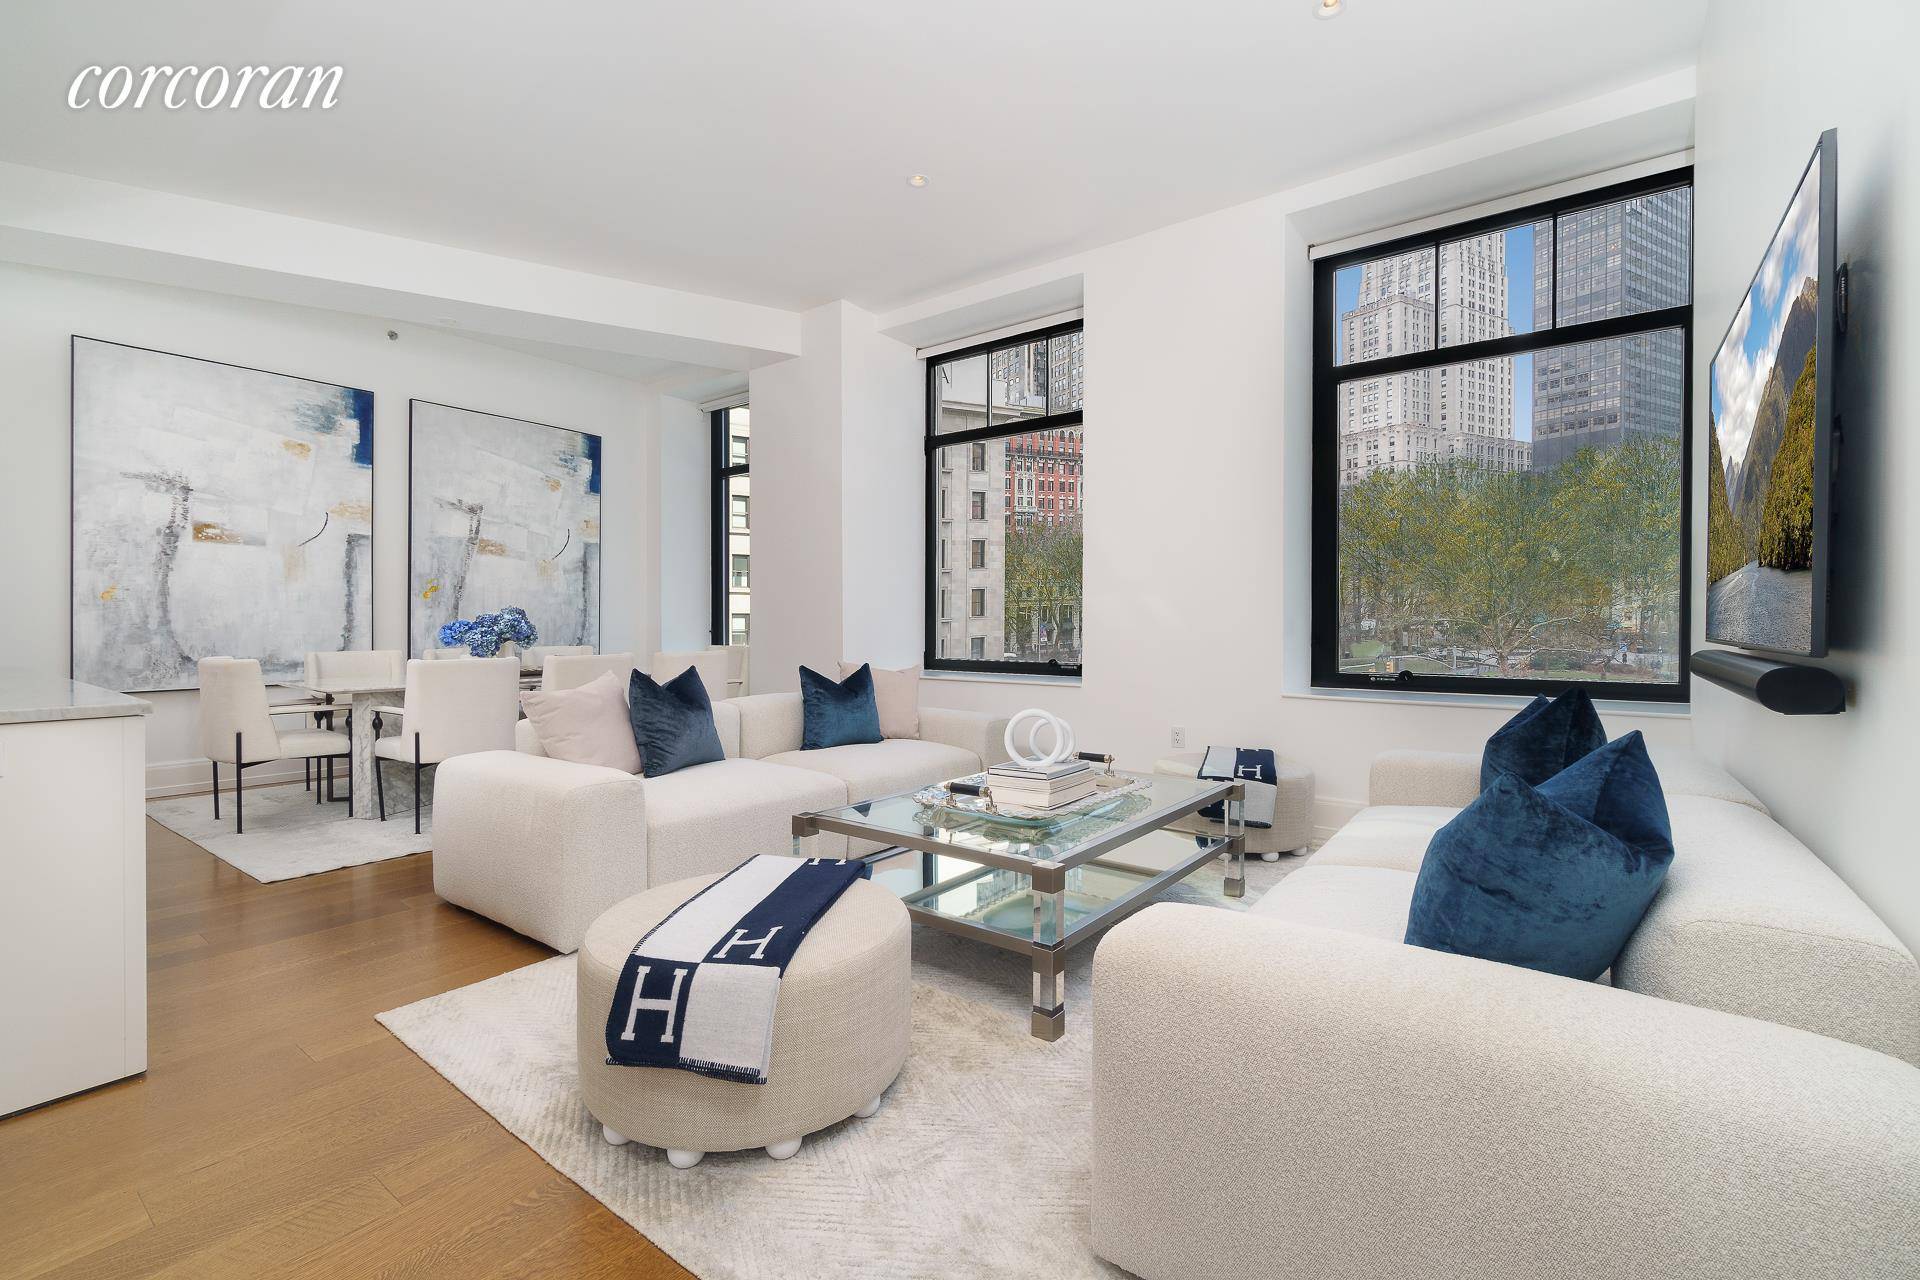 There are spectacular picturesque Madison Square Park views from every room of this luxurious three bedroom, three and a half bathroom home.